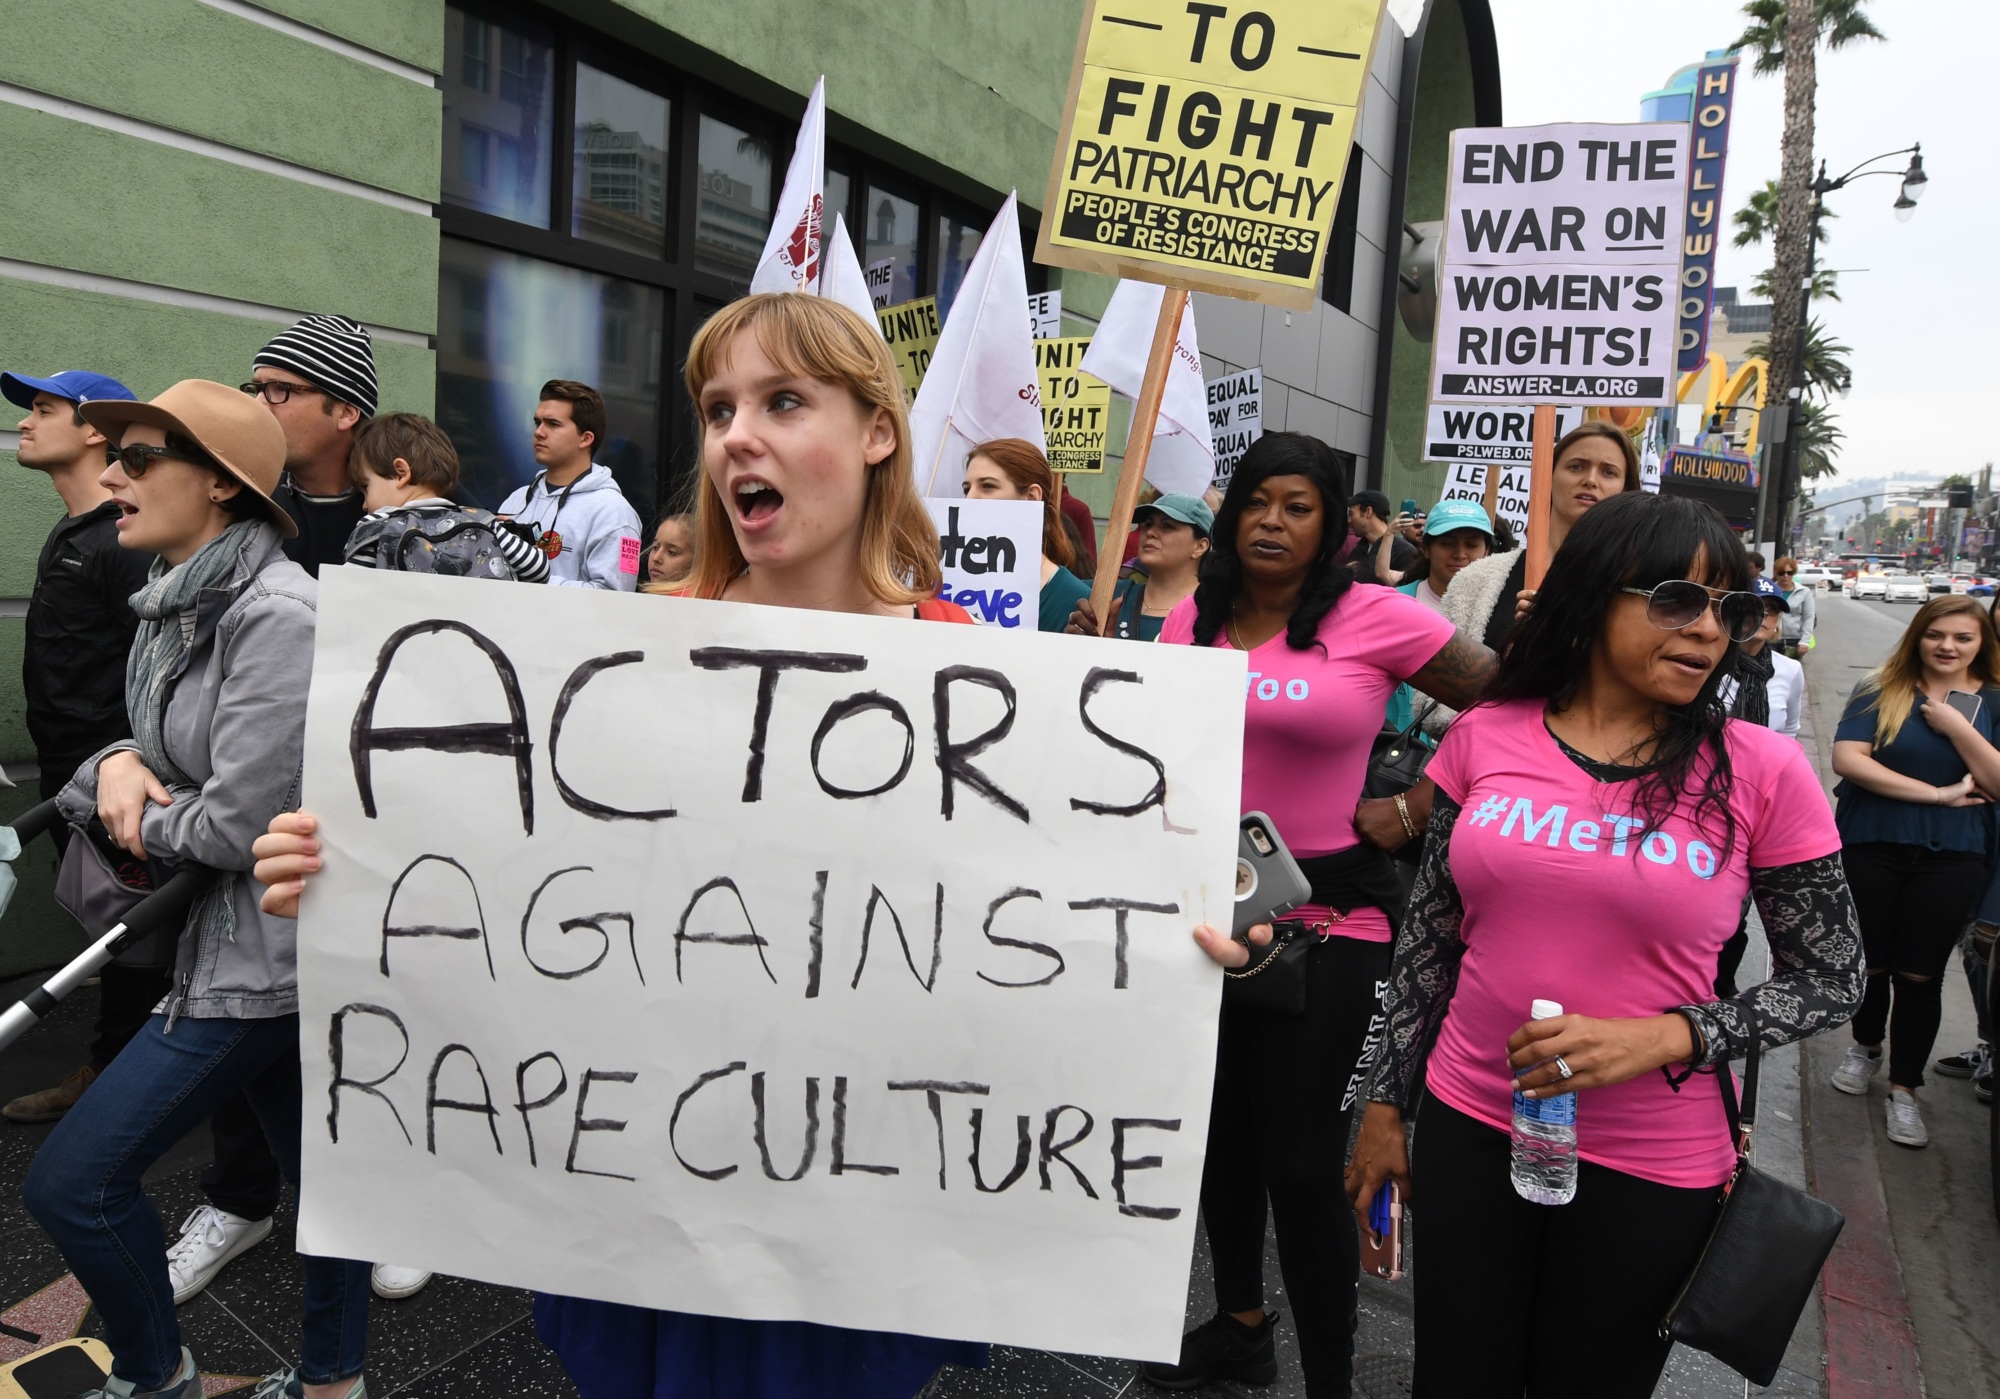 Woman at a protest holding a sign that reads 'actors against rape culture'